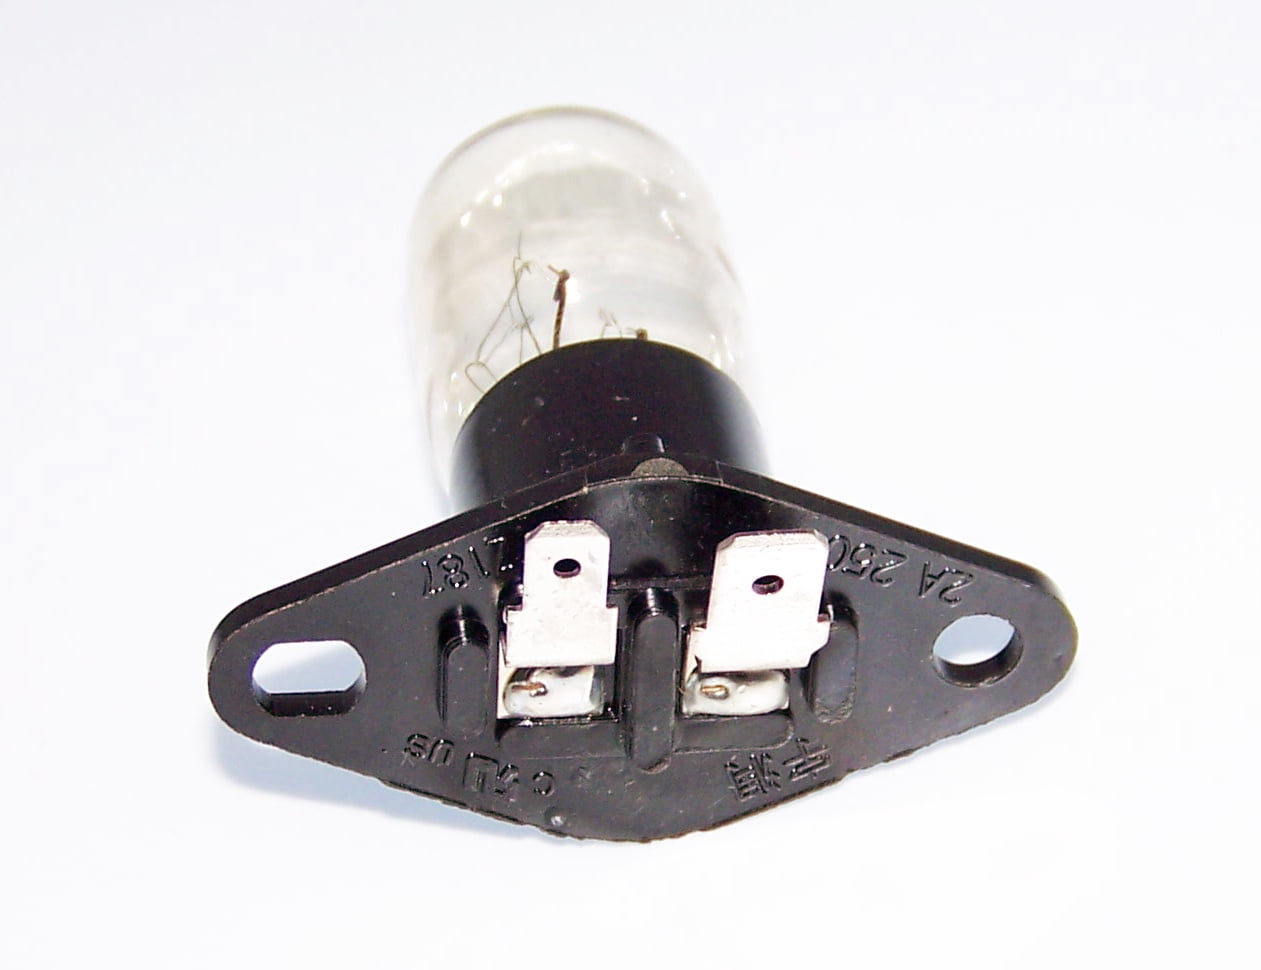 Microwave Oven Global Light Universal Lamp Bulb Base Design 250V 2A Replacement 